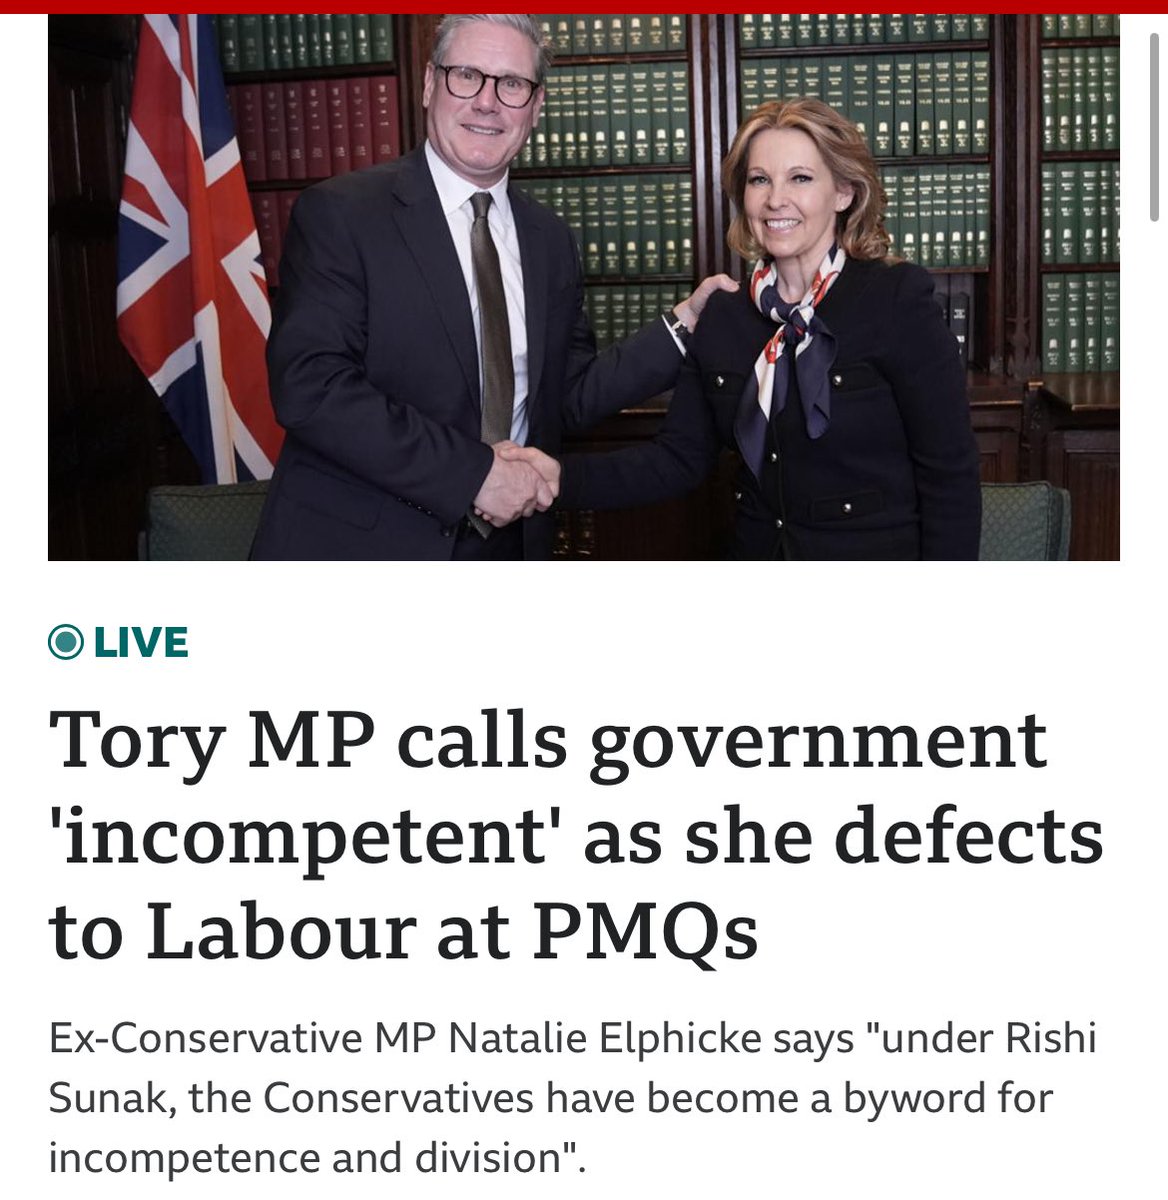 Any defecting MO or one who has the whip withdrawn should cause an automatic by-election. Any PM That stands down should cause a General Election. End of.